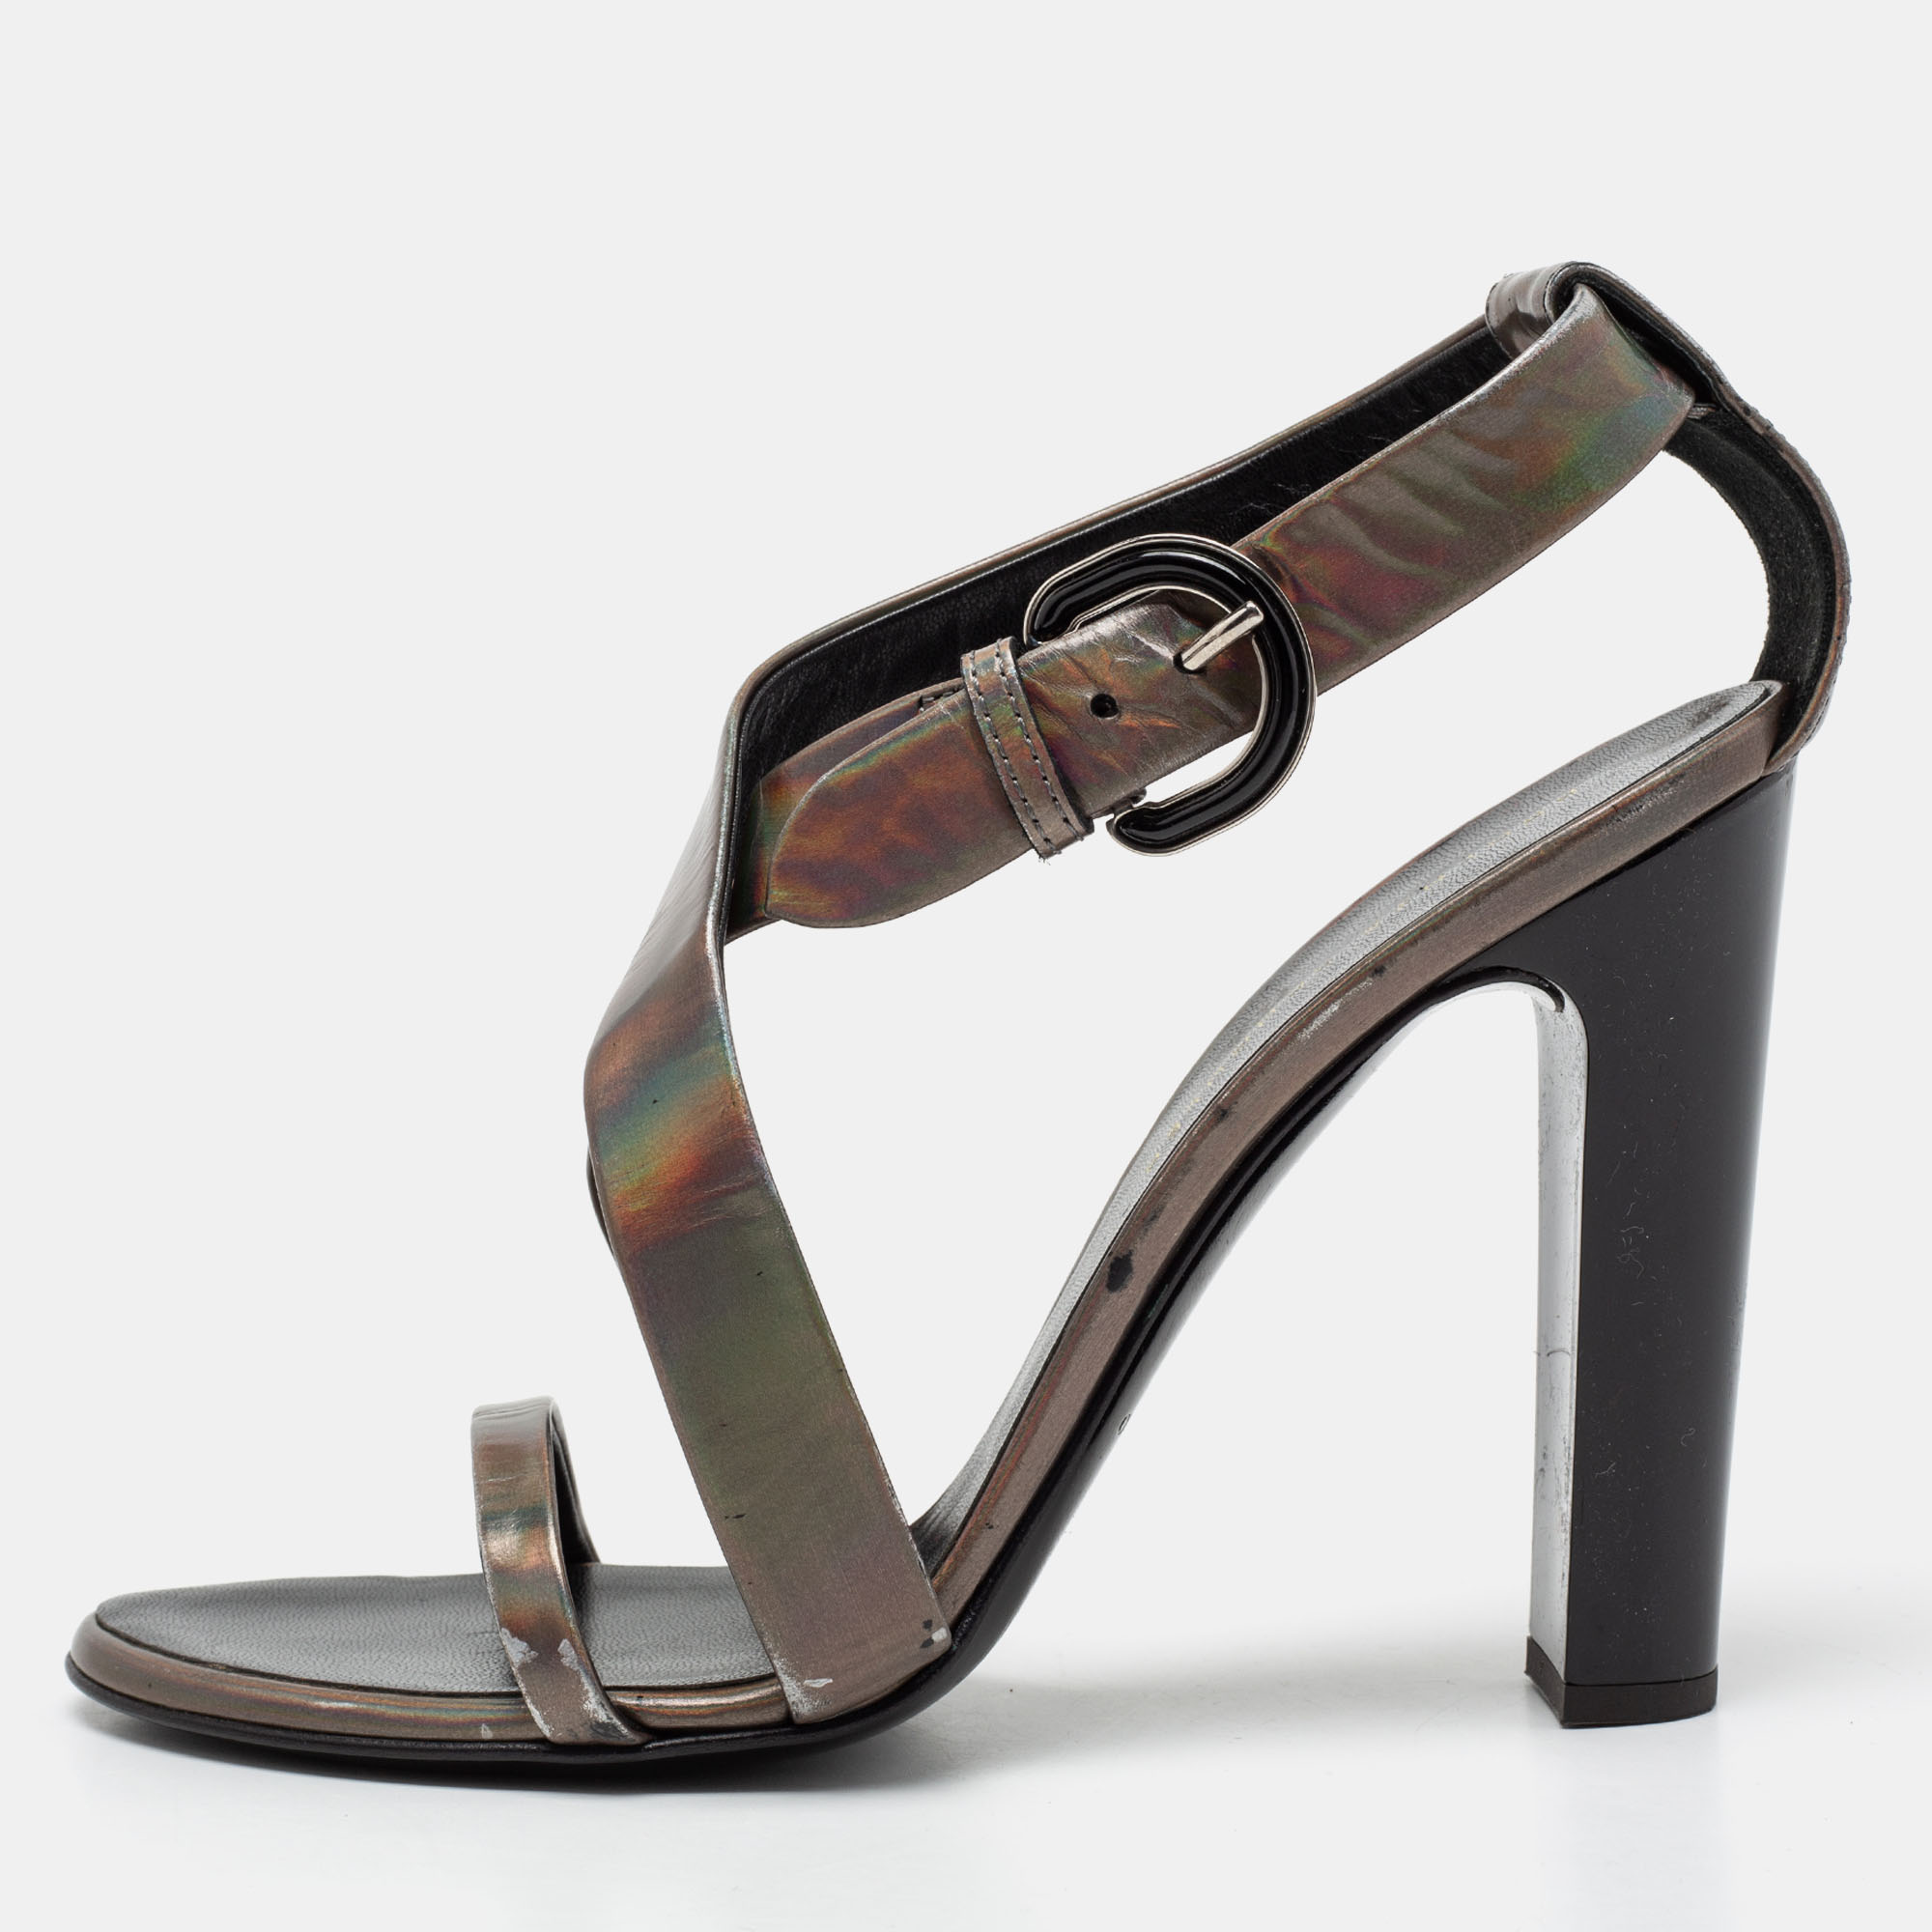 Proenza schouler metallic patent leather iridescent strappy sandals size 37.5